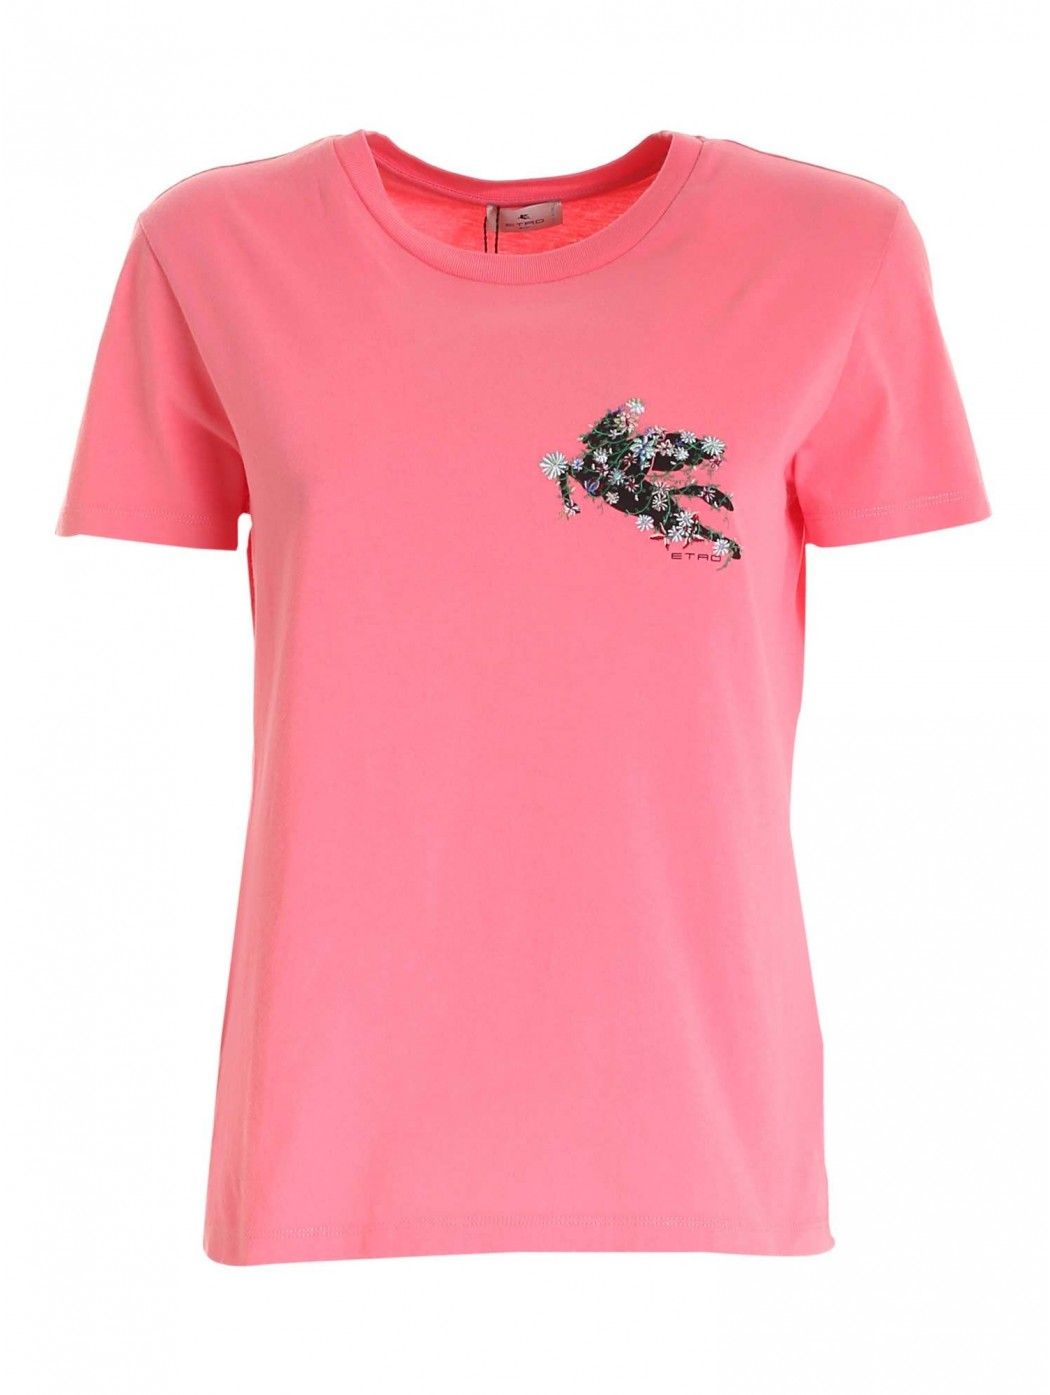 T-SHIRT FITTED JERSEY ETRO DONNA 145147957 0650